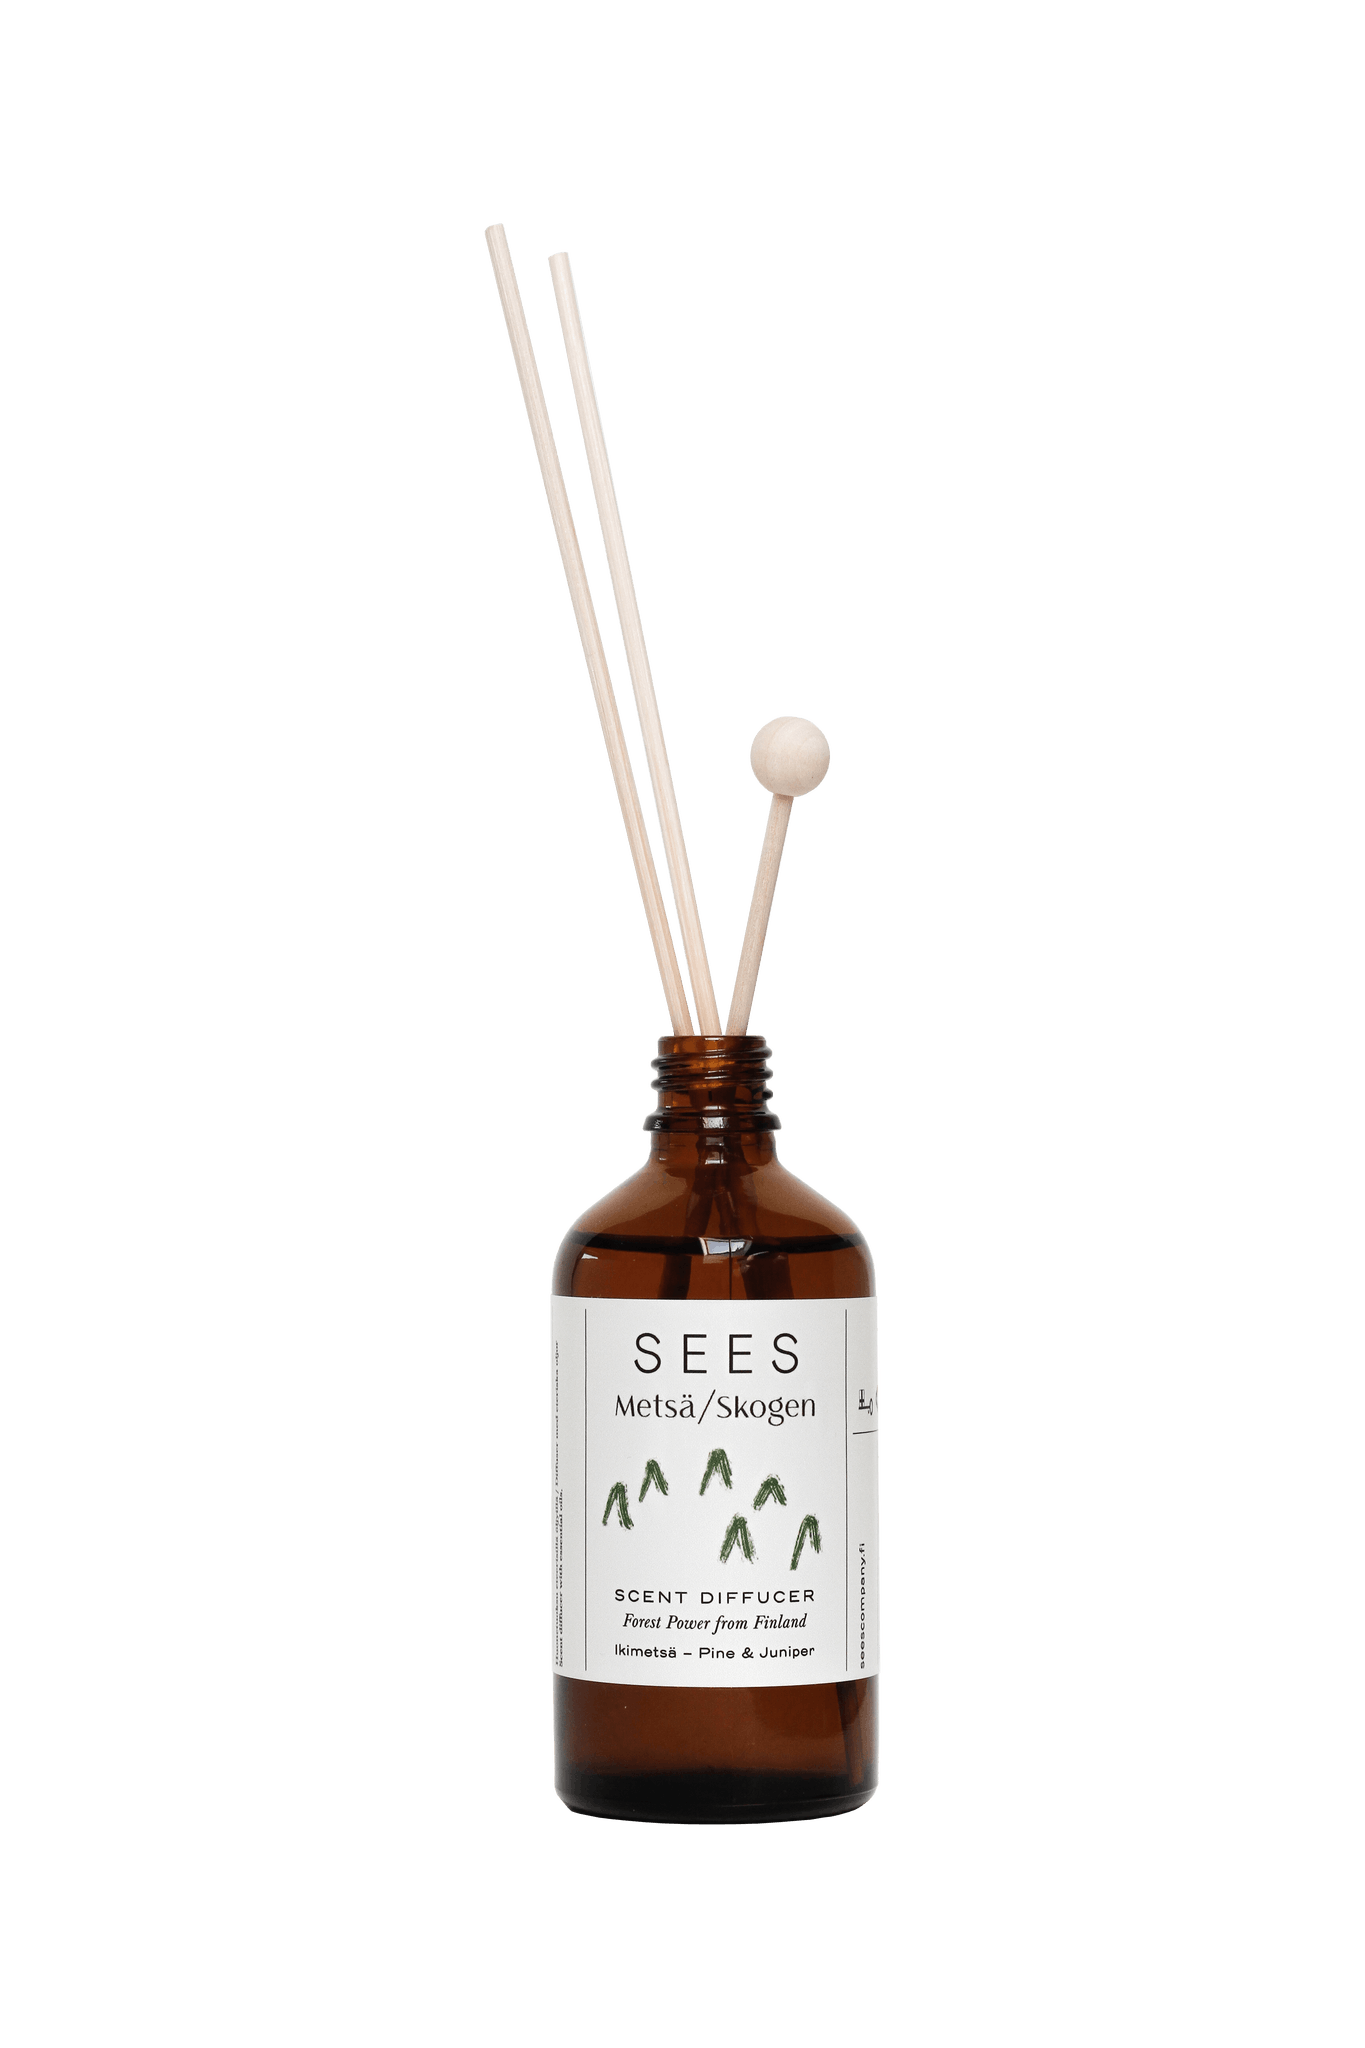 Room diffuser, natural scents, organic, Nordic design, Scandinavian, forest scent, pine trees